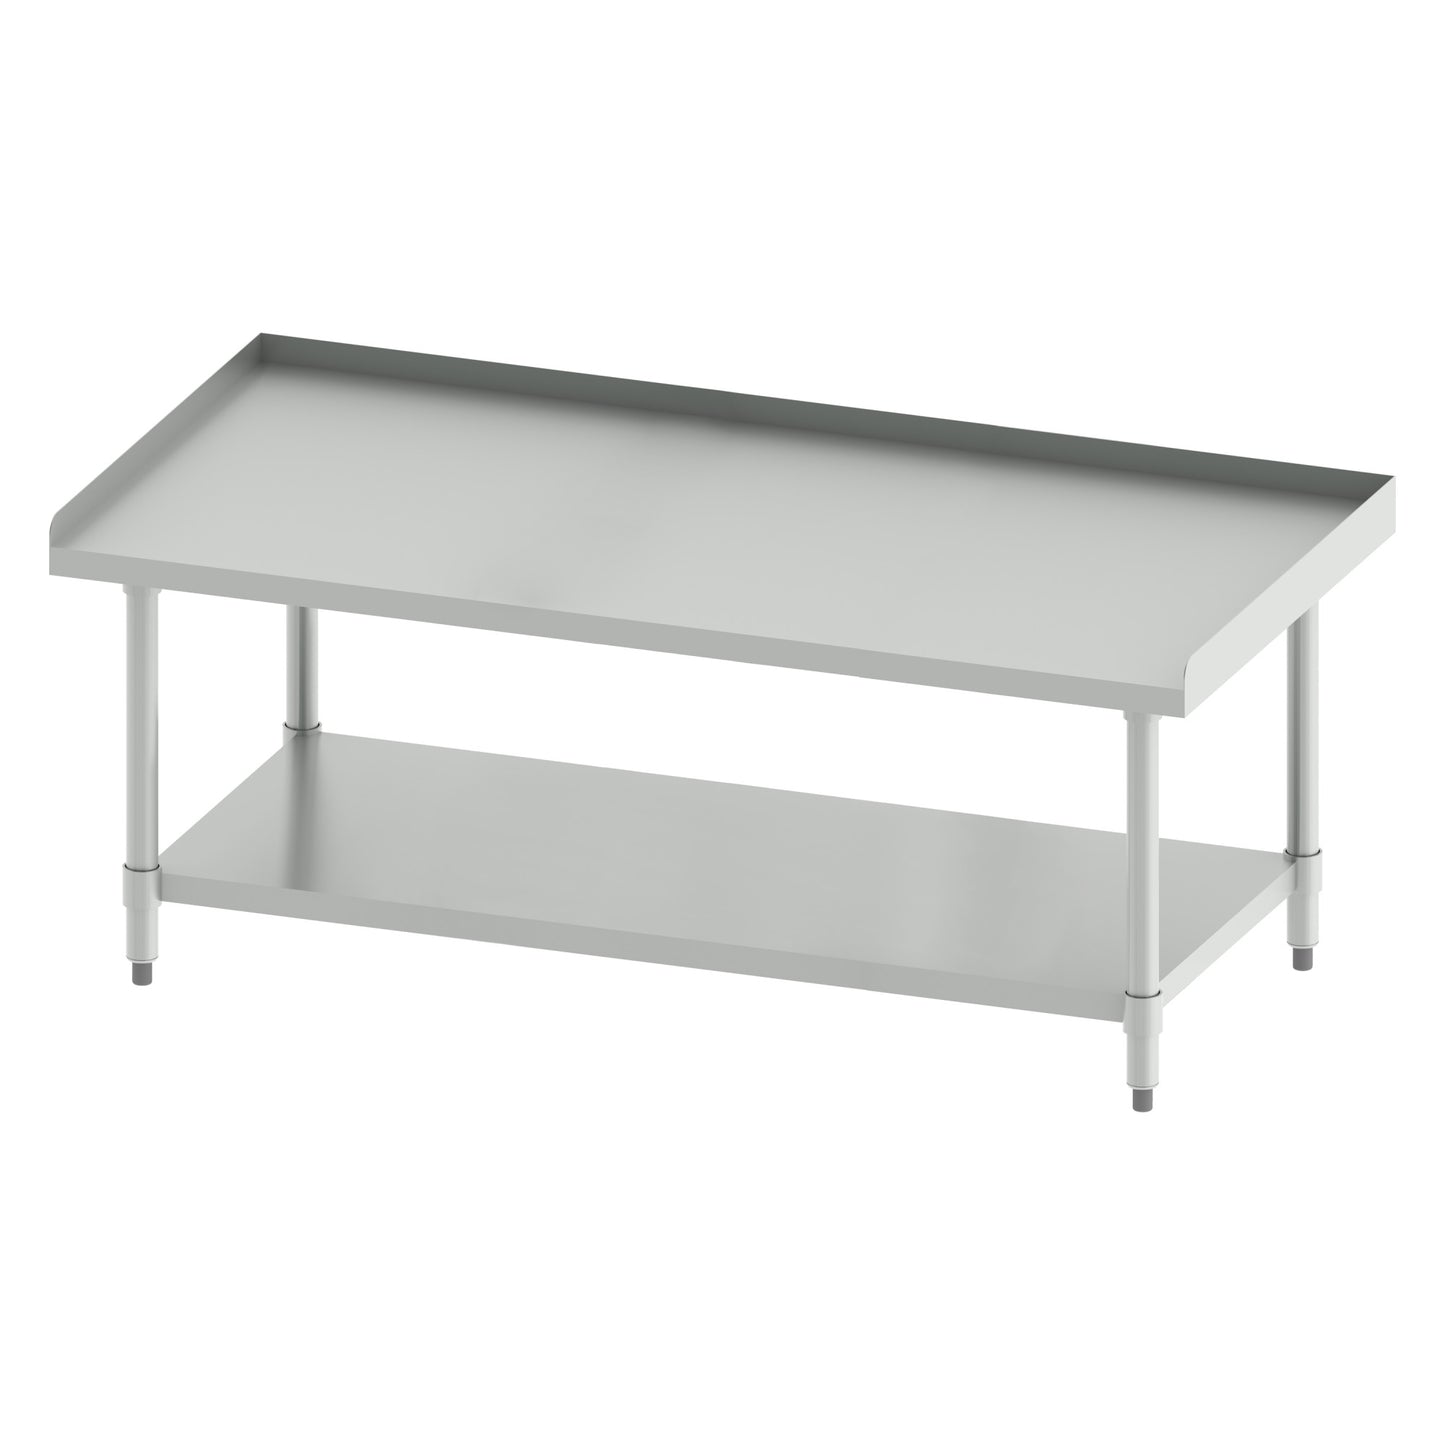 ES-6030 - Stainless Steel Equipment Stand - 24" x 30" x 24"